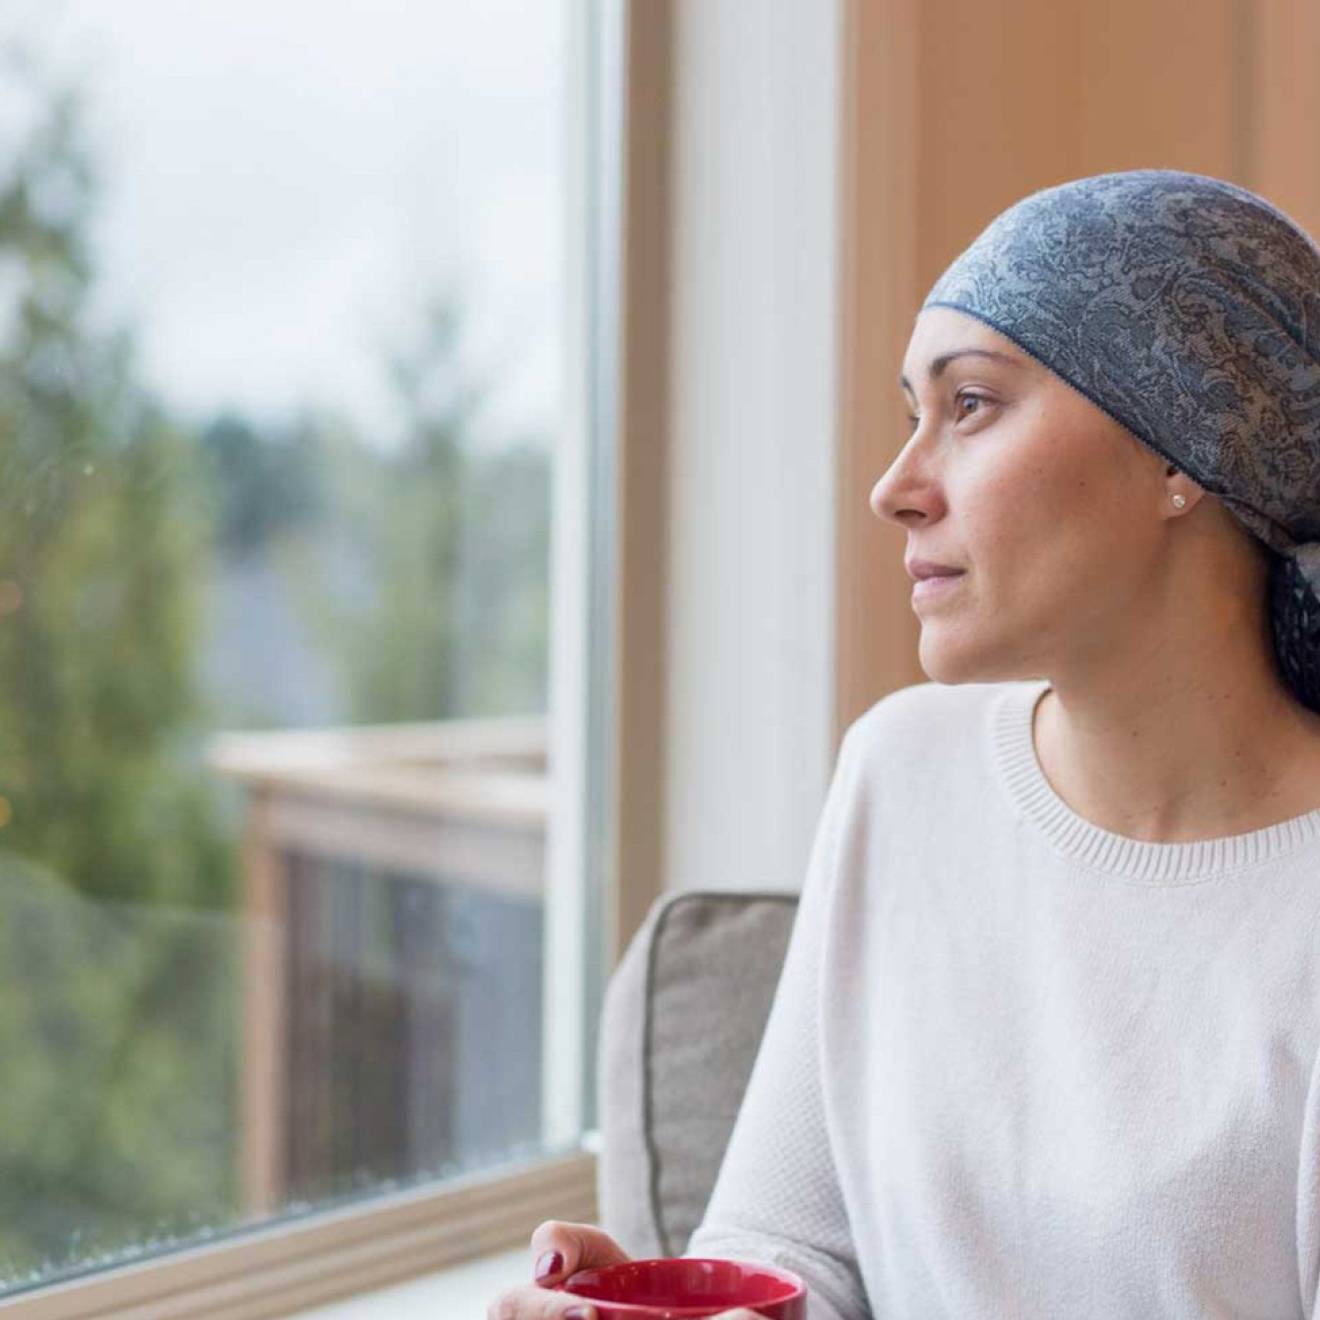 Woman recovering from breast cancer wearing a scarf on her head stares out the window